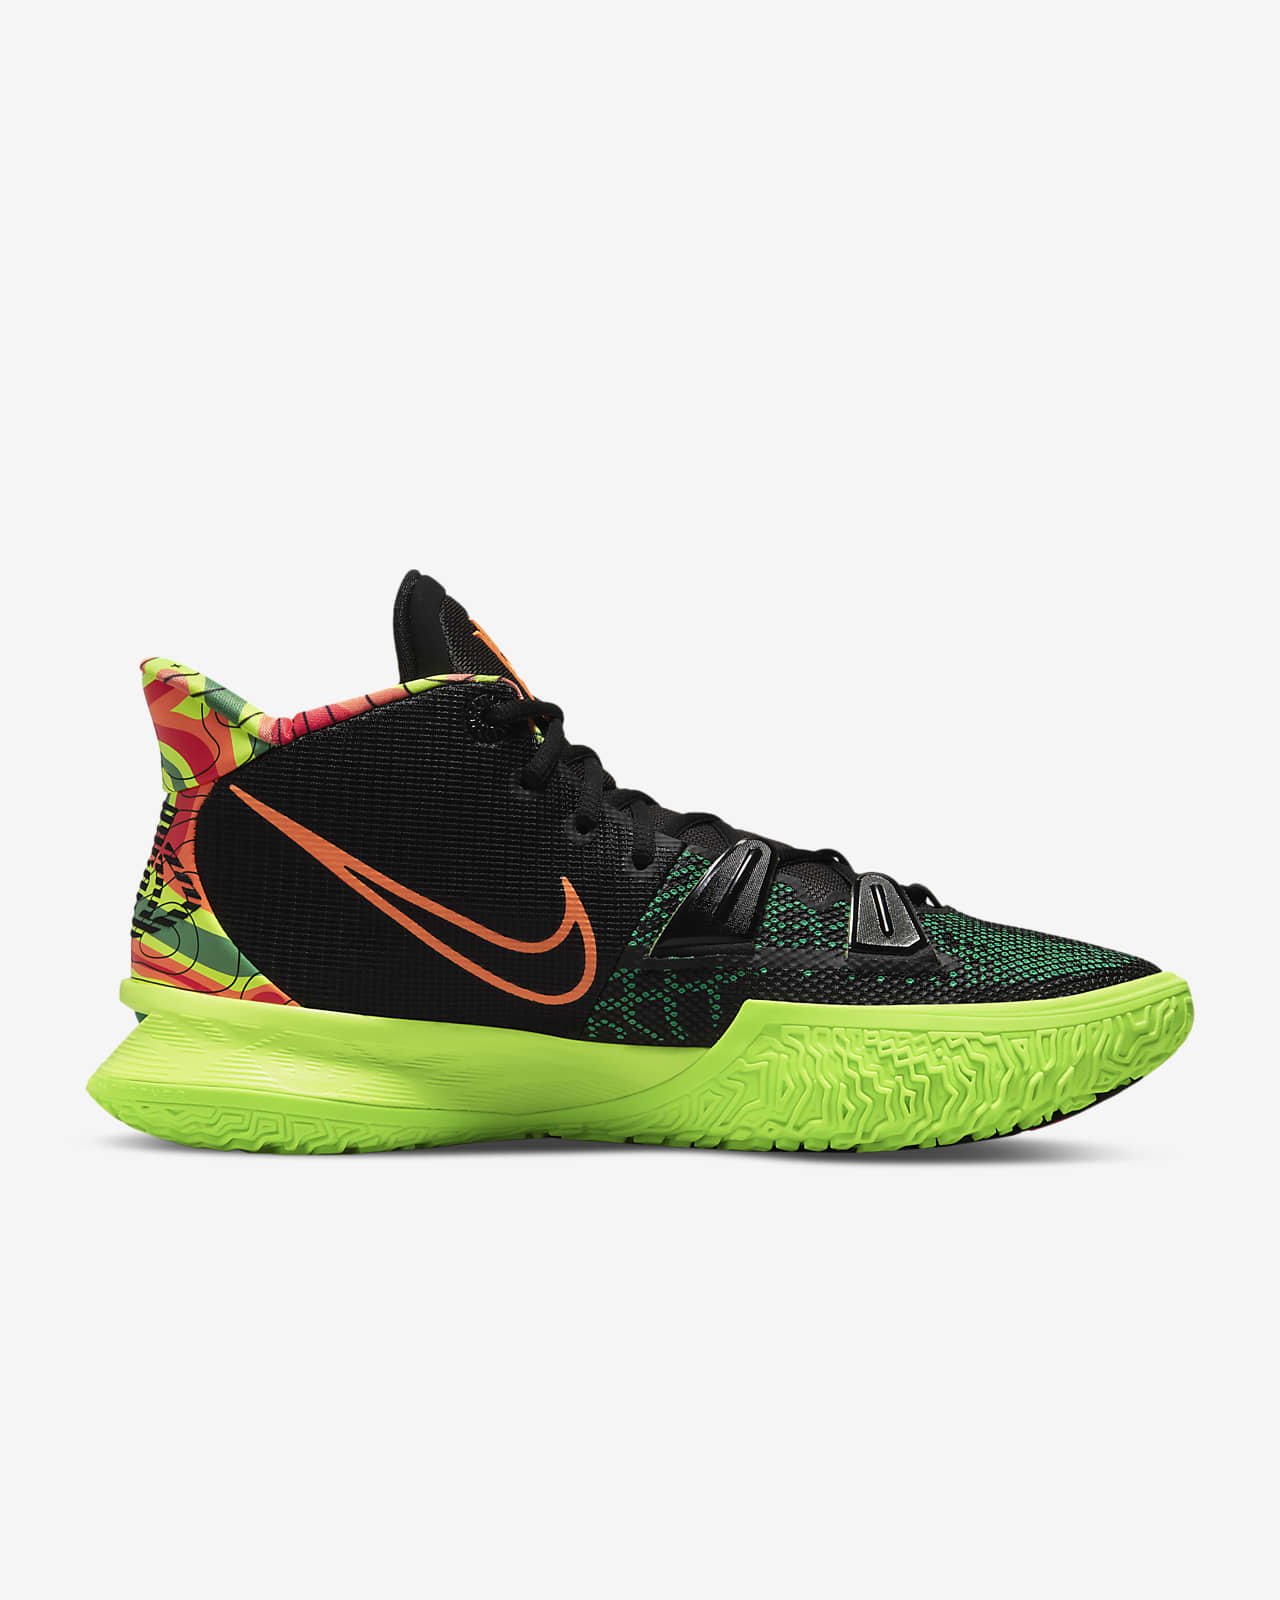 kyrie 2 game 7 shoes